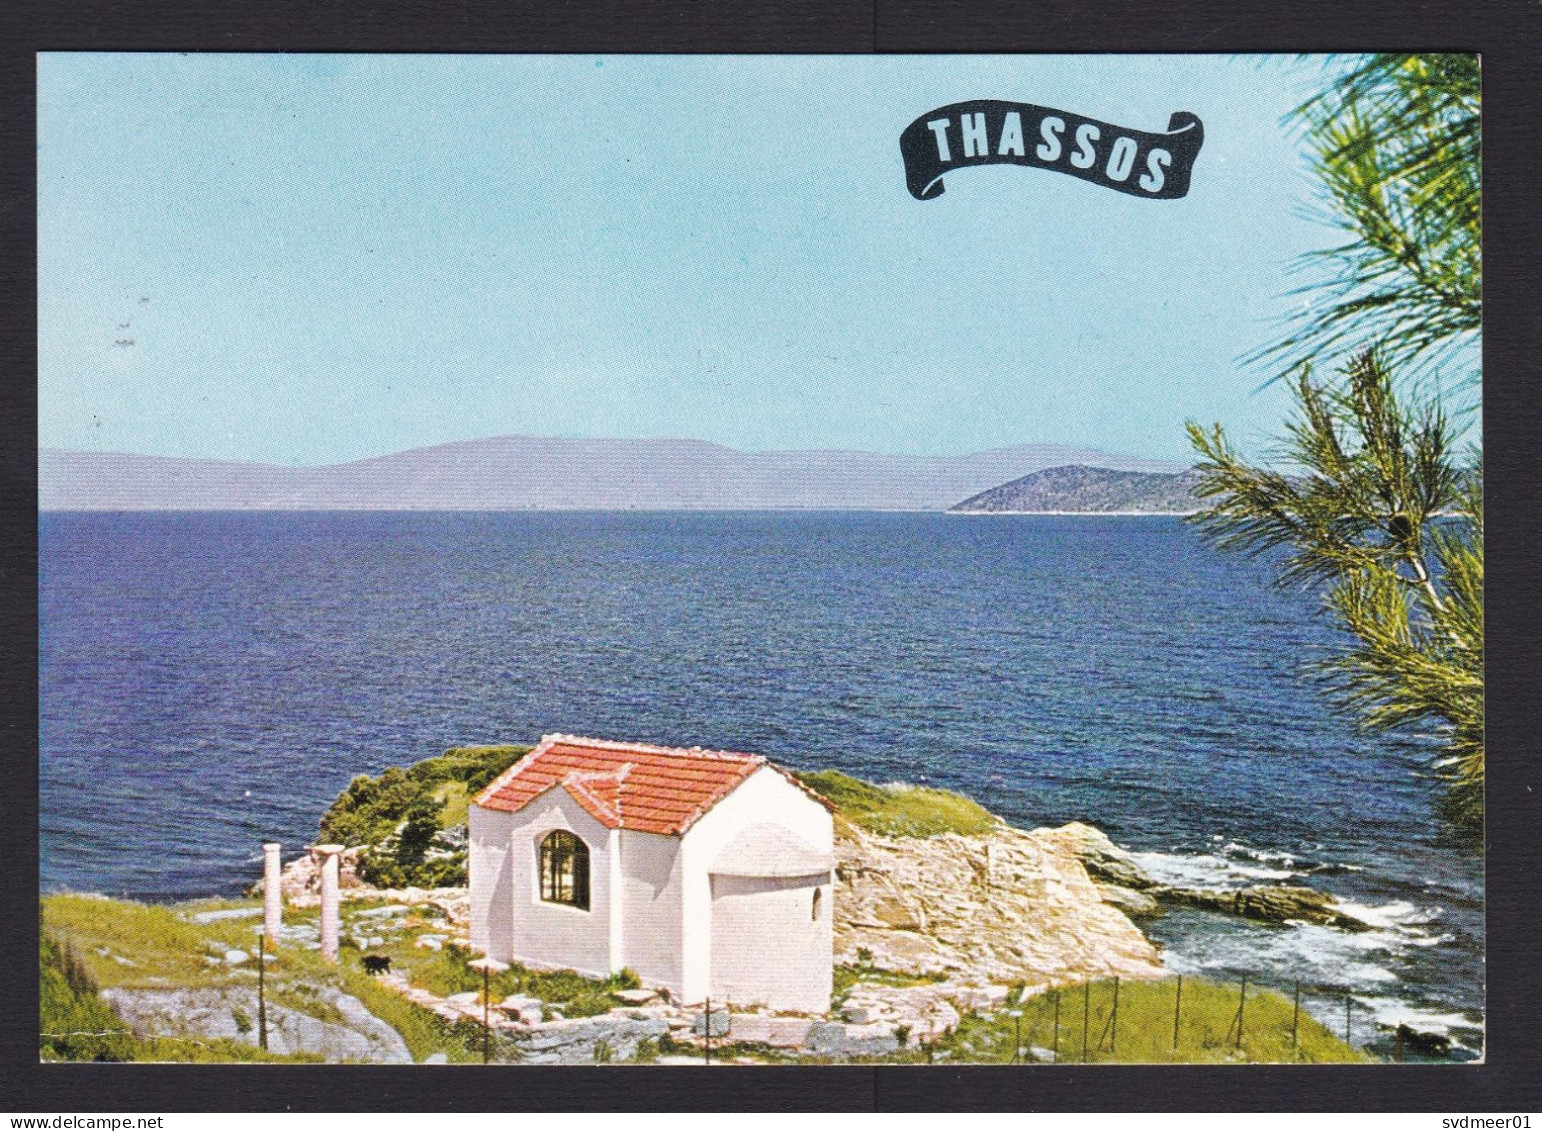 Greece: Picture Postcard To Netherlands, 2000s, 2 Stamps, Firefighter Airplane, Fire, Rainbow, Thassos (traces Of Use) - Briefe U. Dokumente